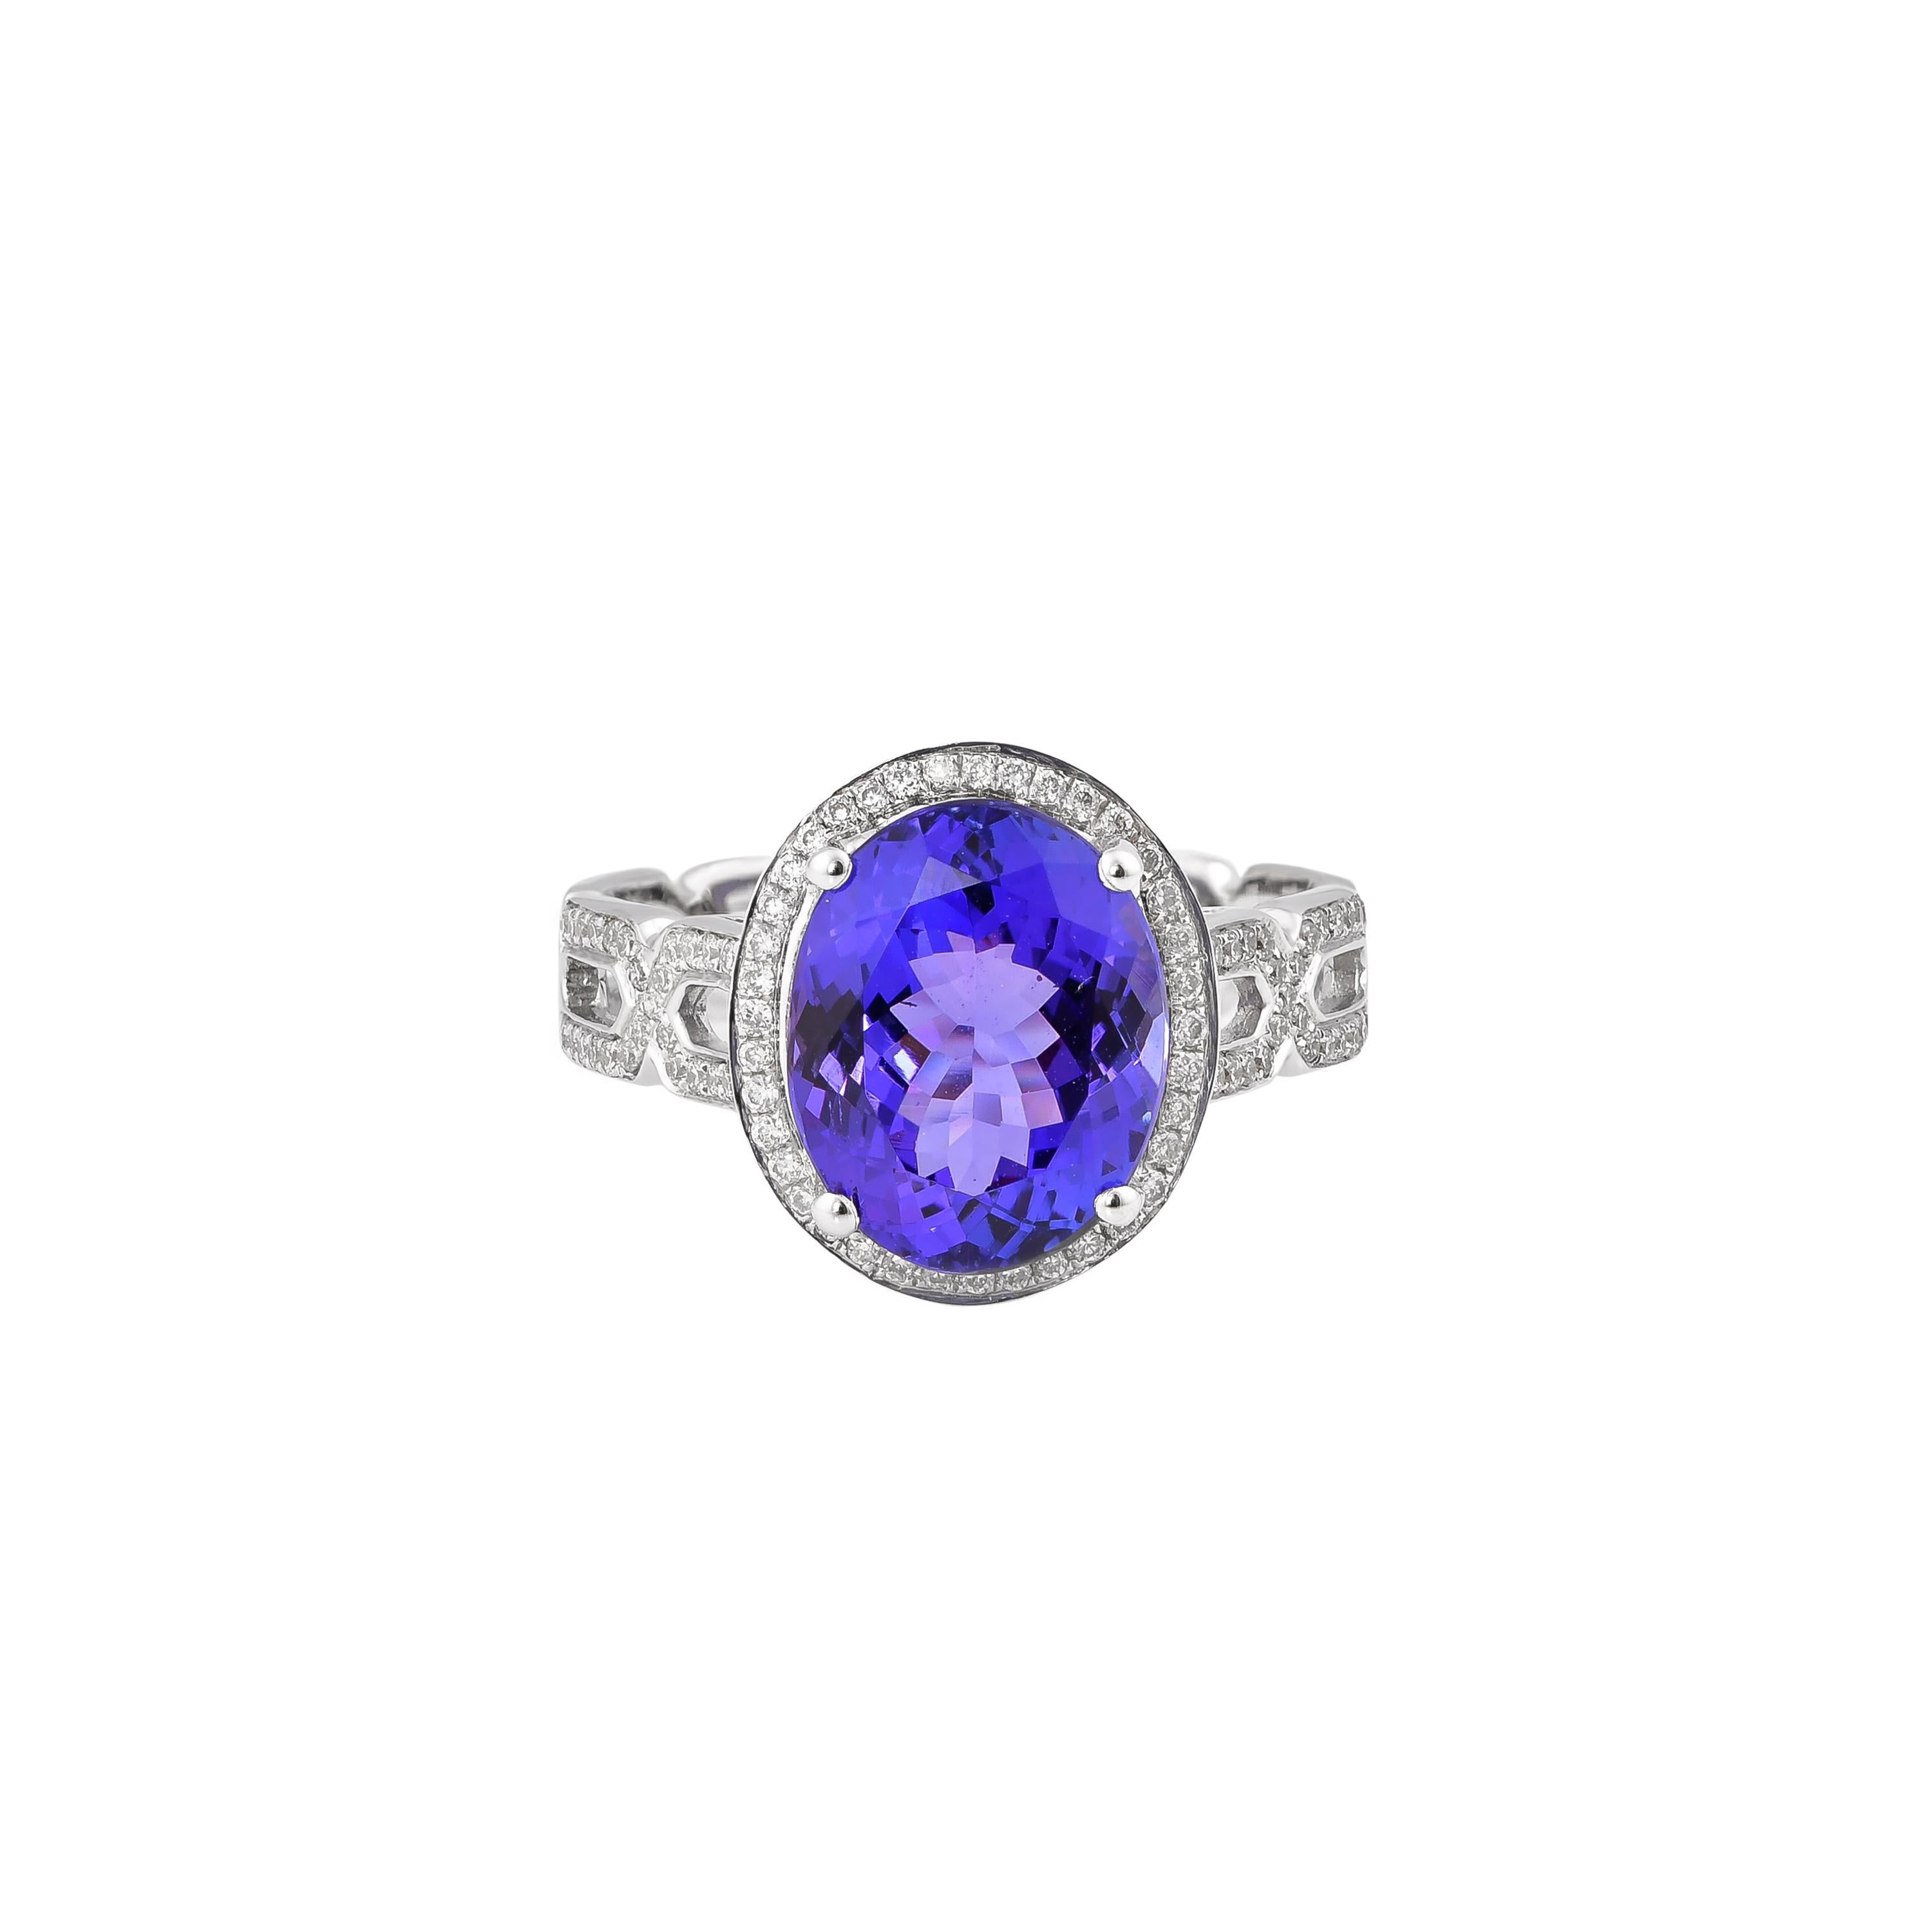 Oval Cut 4.1 Carat Tanzanite and White Diamond Ring in 18 Karat White Gold For Sale